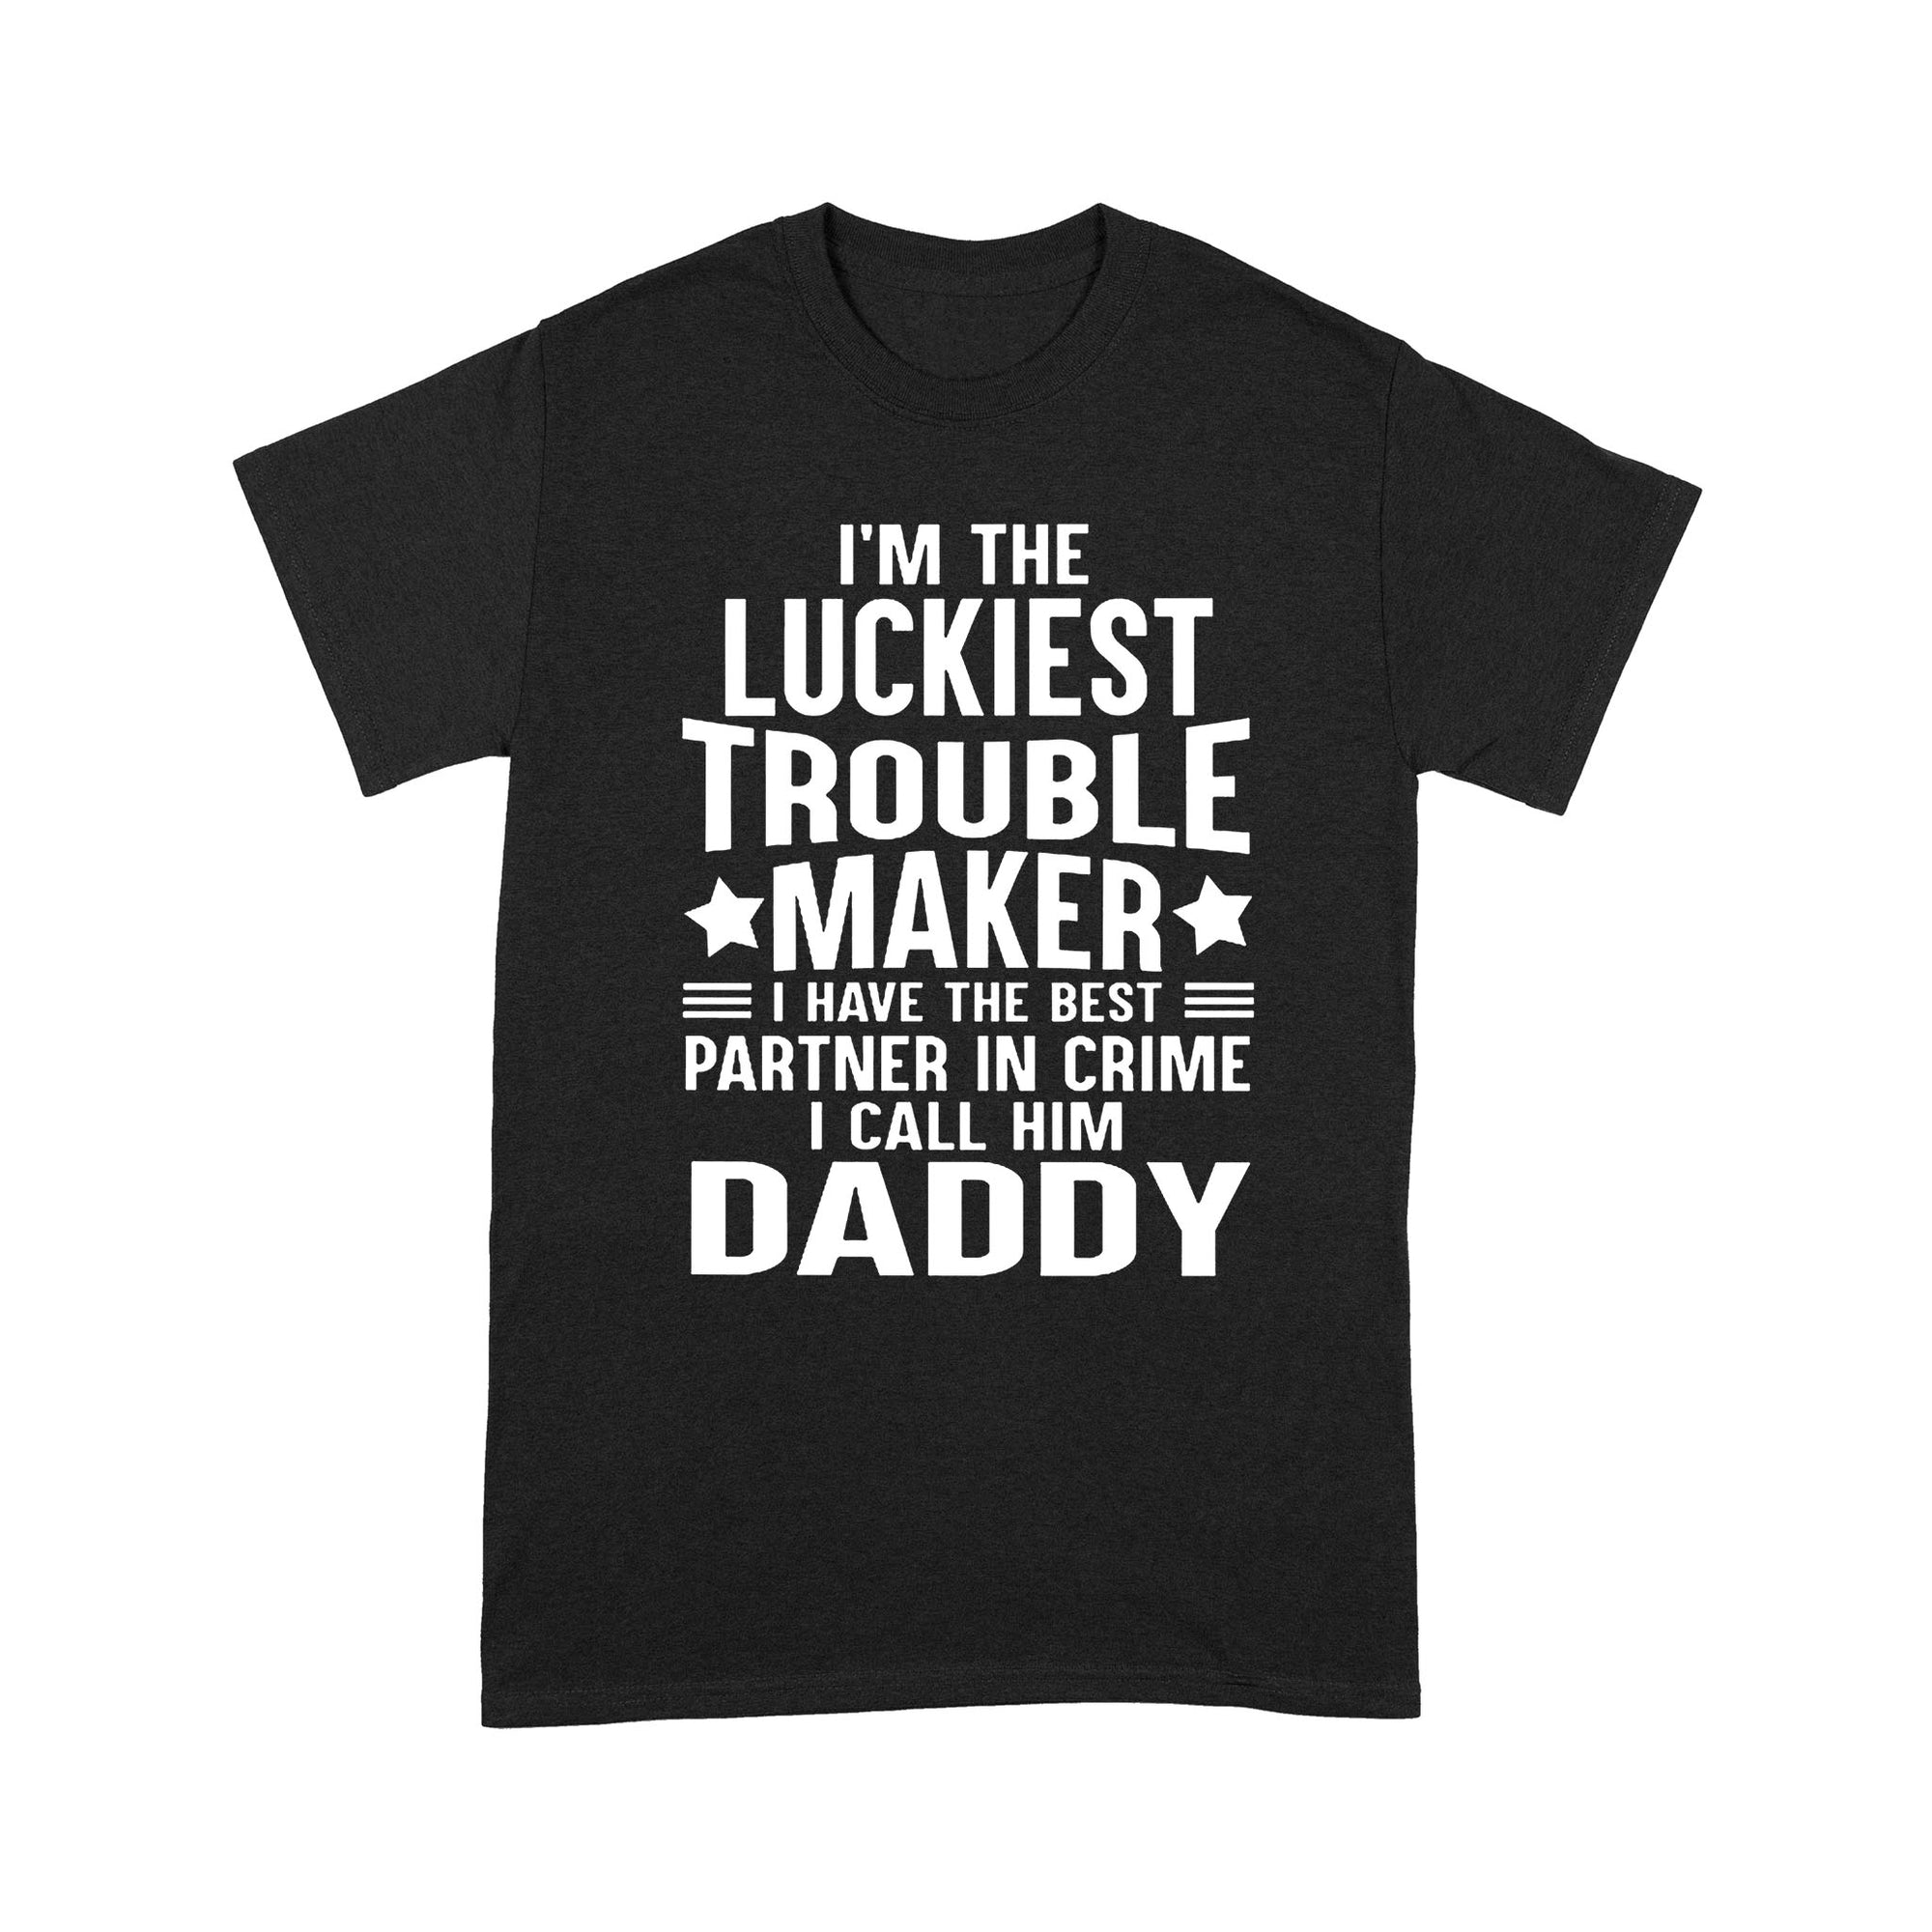 I'm The Luckiest Trouble Maker I Call Him Daddy - Standard T-shirt